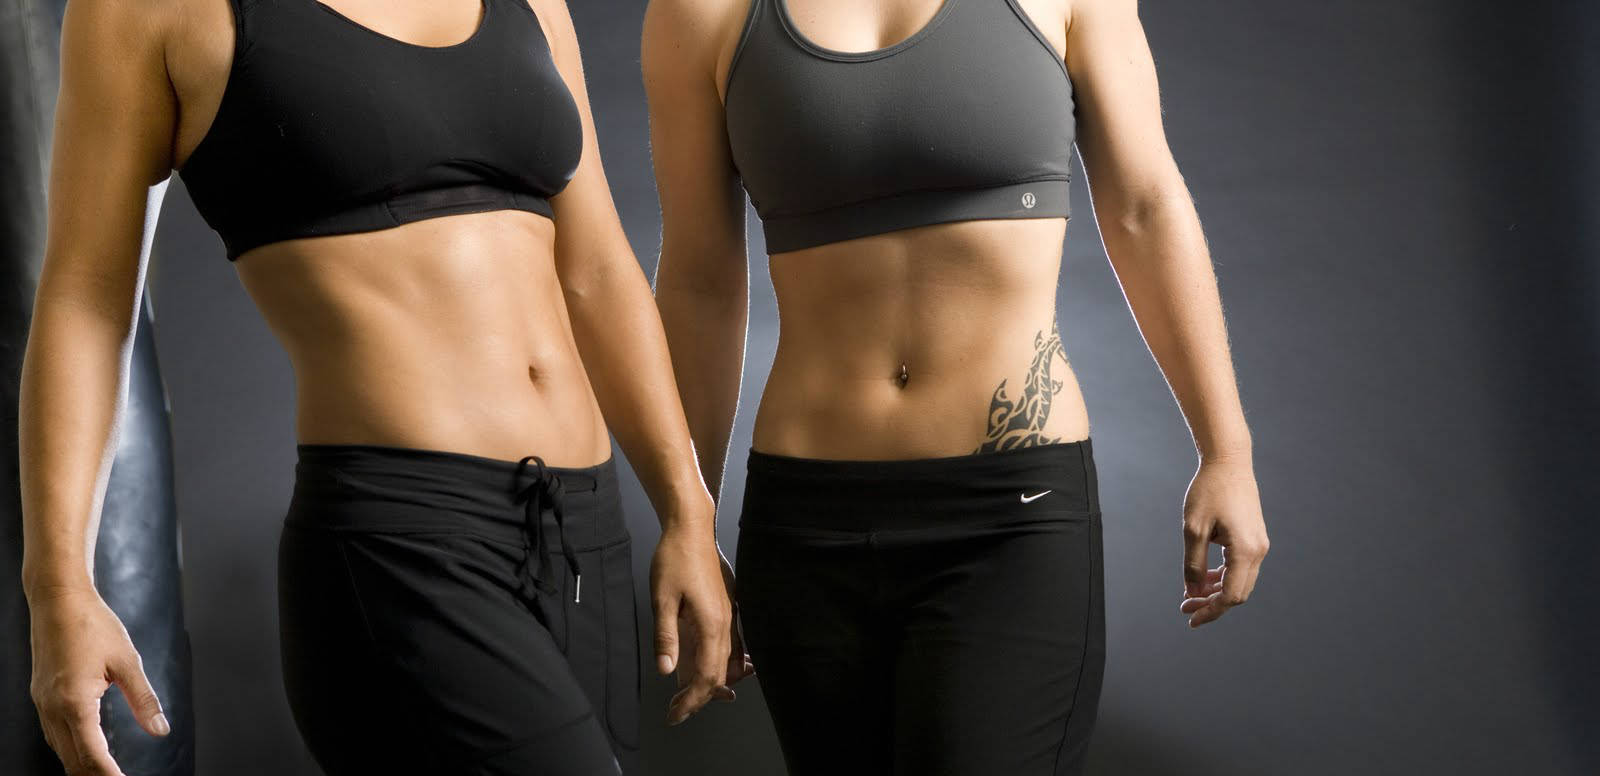 15 Easy Ways to Flatten Your Belly